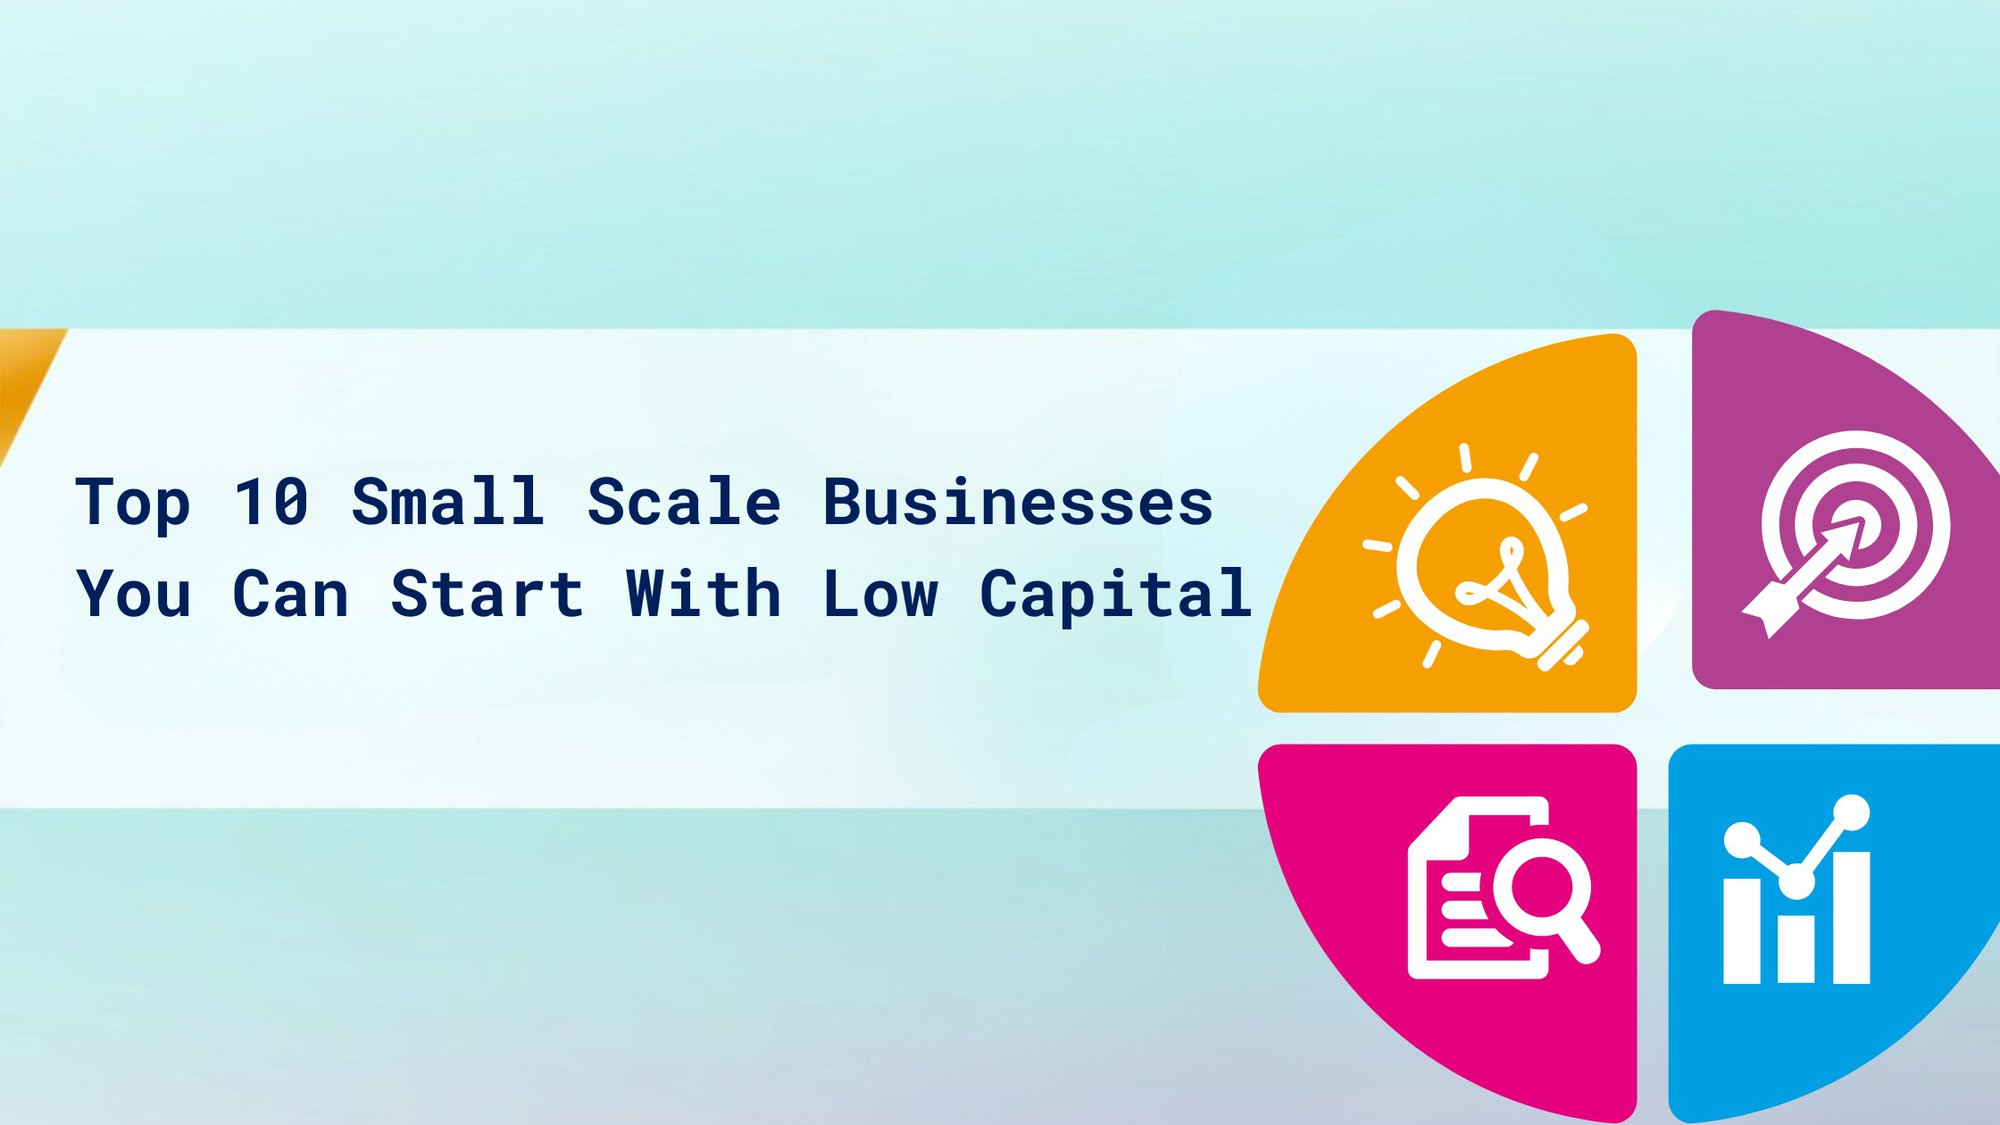 Top 10 Small Scale Businesses You Can Start With Low Capital cover